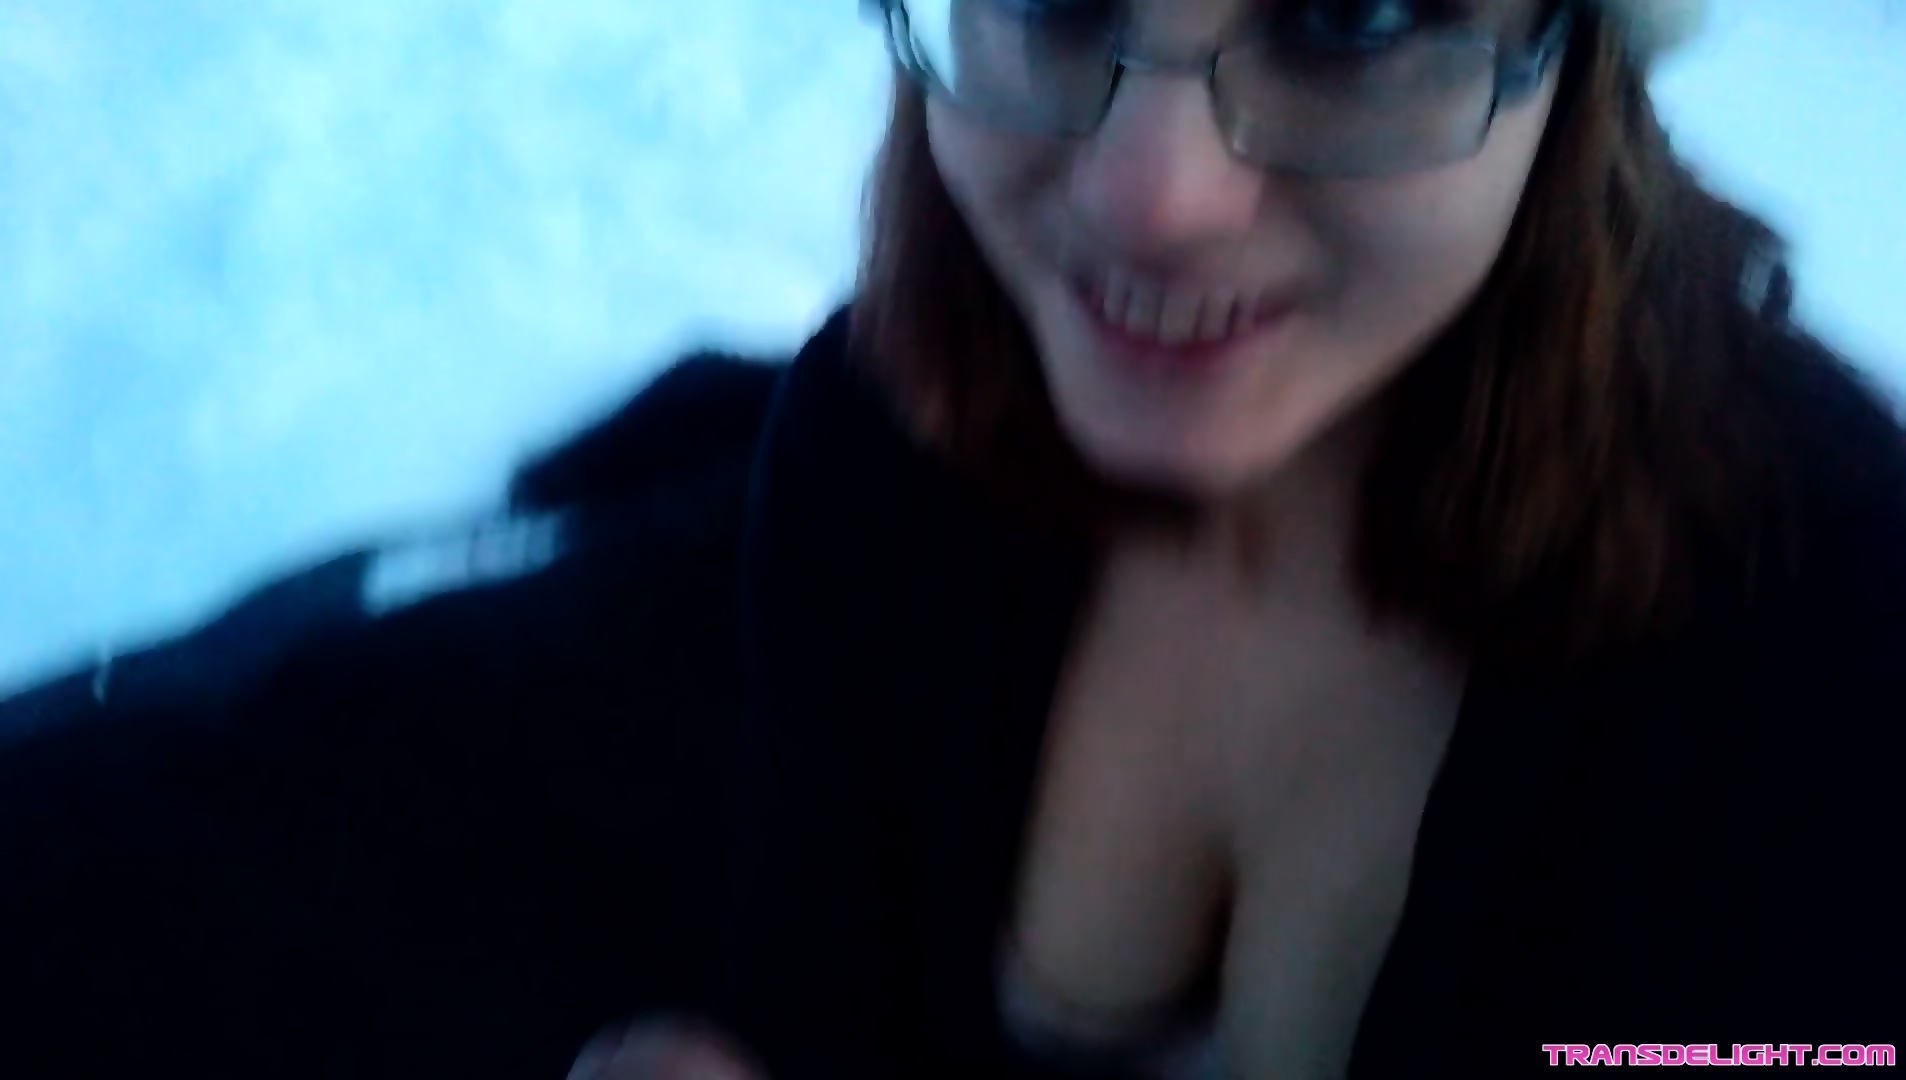 hot blowjob and sex in outdoor snow